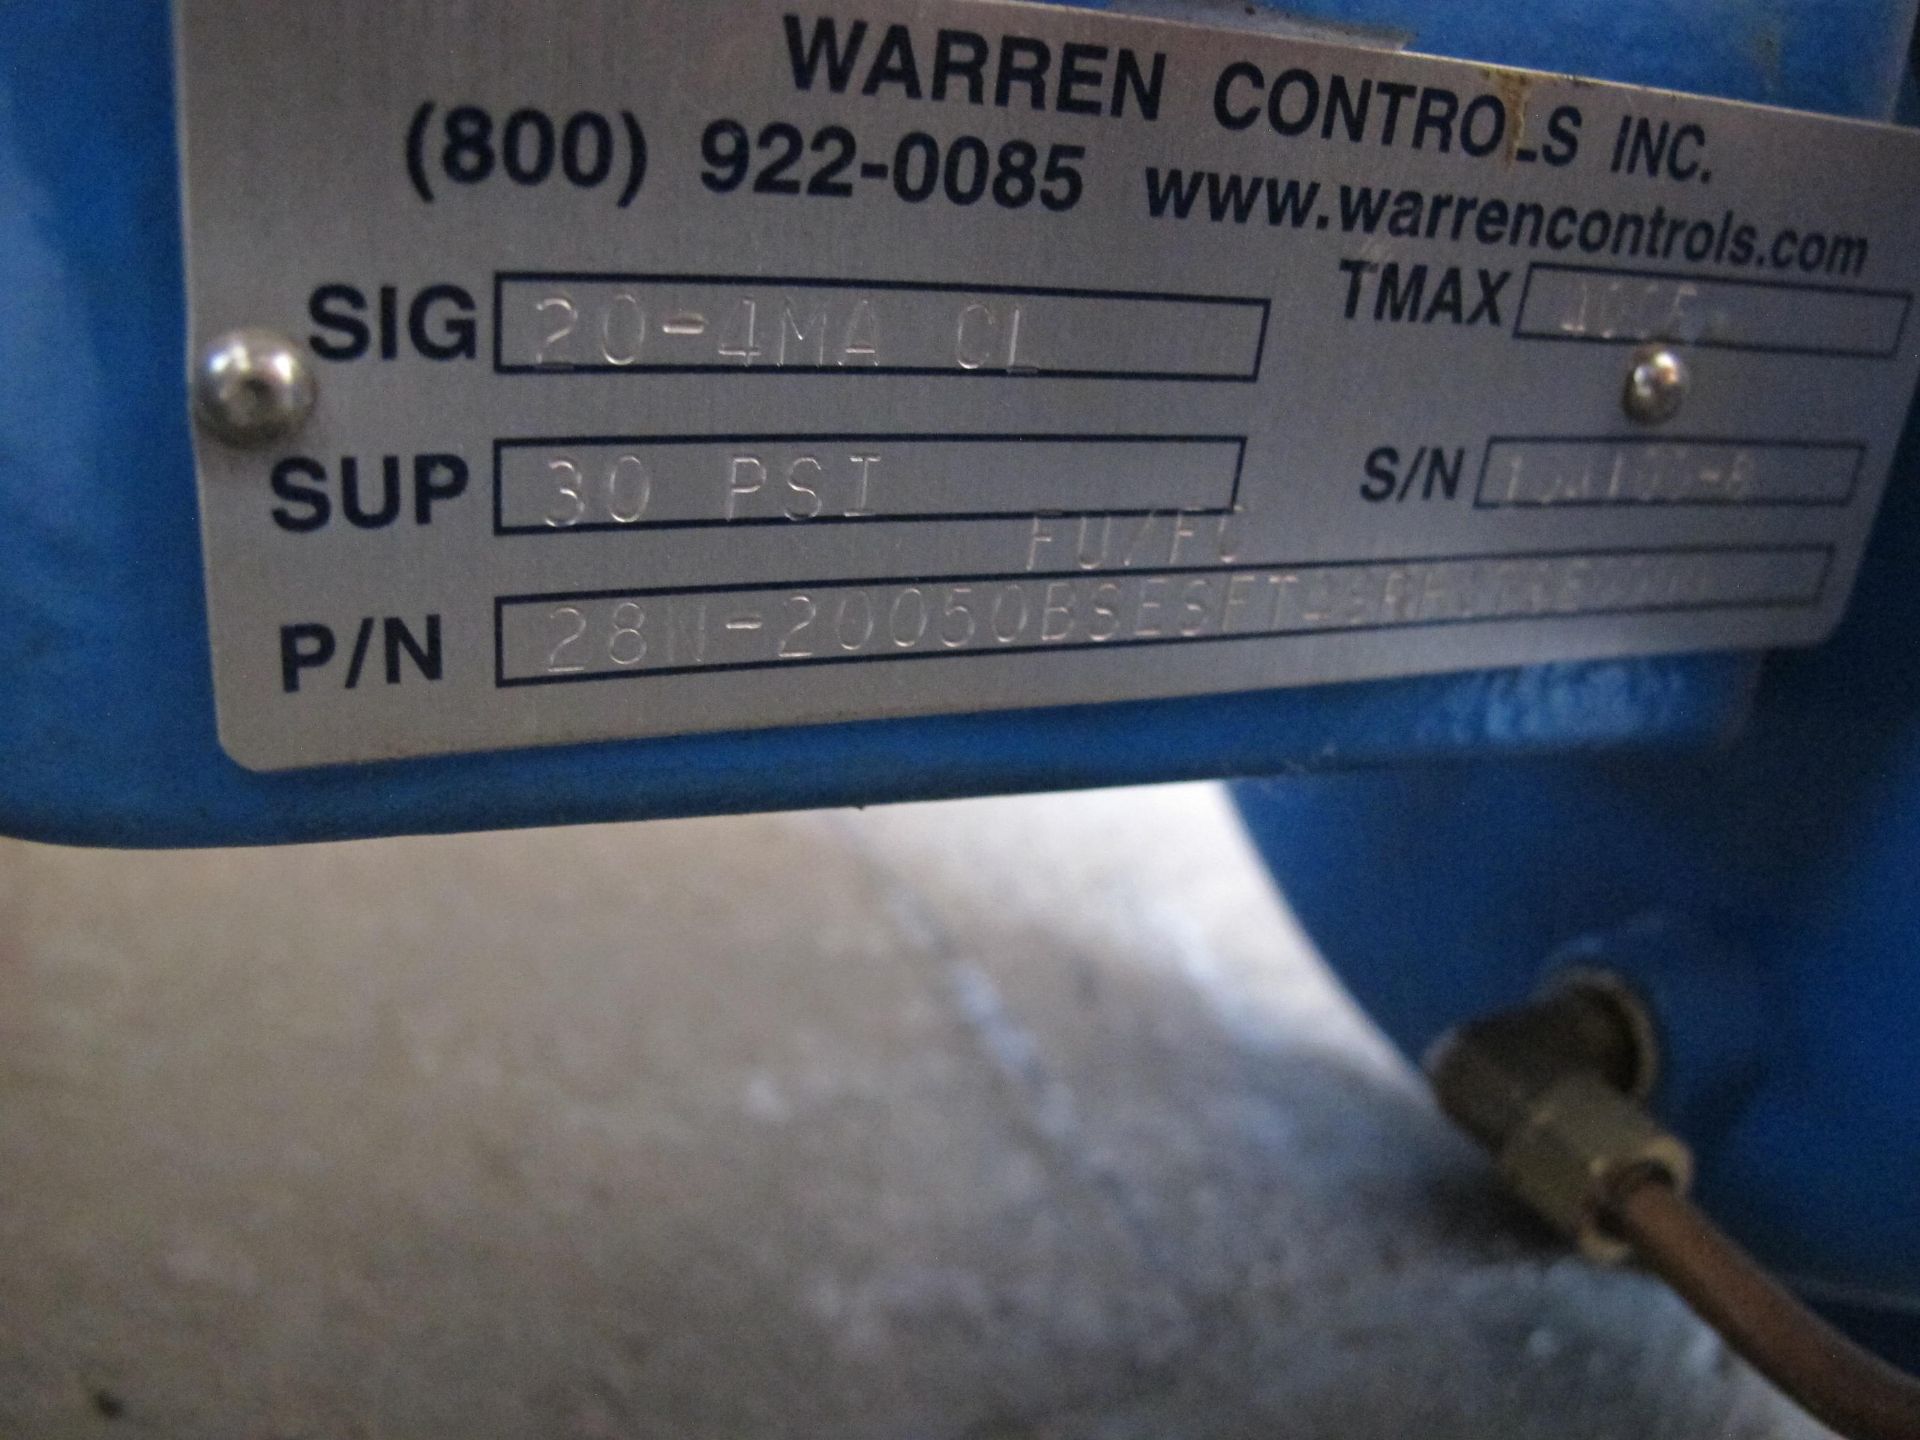 (4) WARREN CONTROLS VALVES, SIG 20-4MA CL, 30 PSI, PART NUMBER 28N-20050BSESFT49RH076E0000, - Image 3 of 3